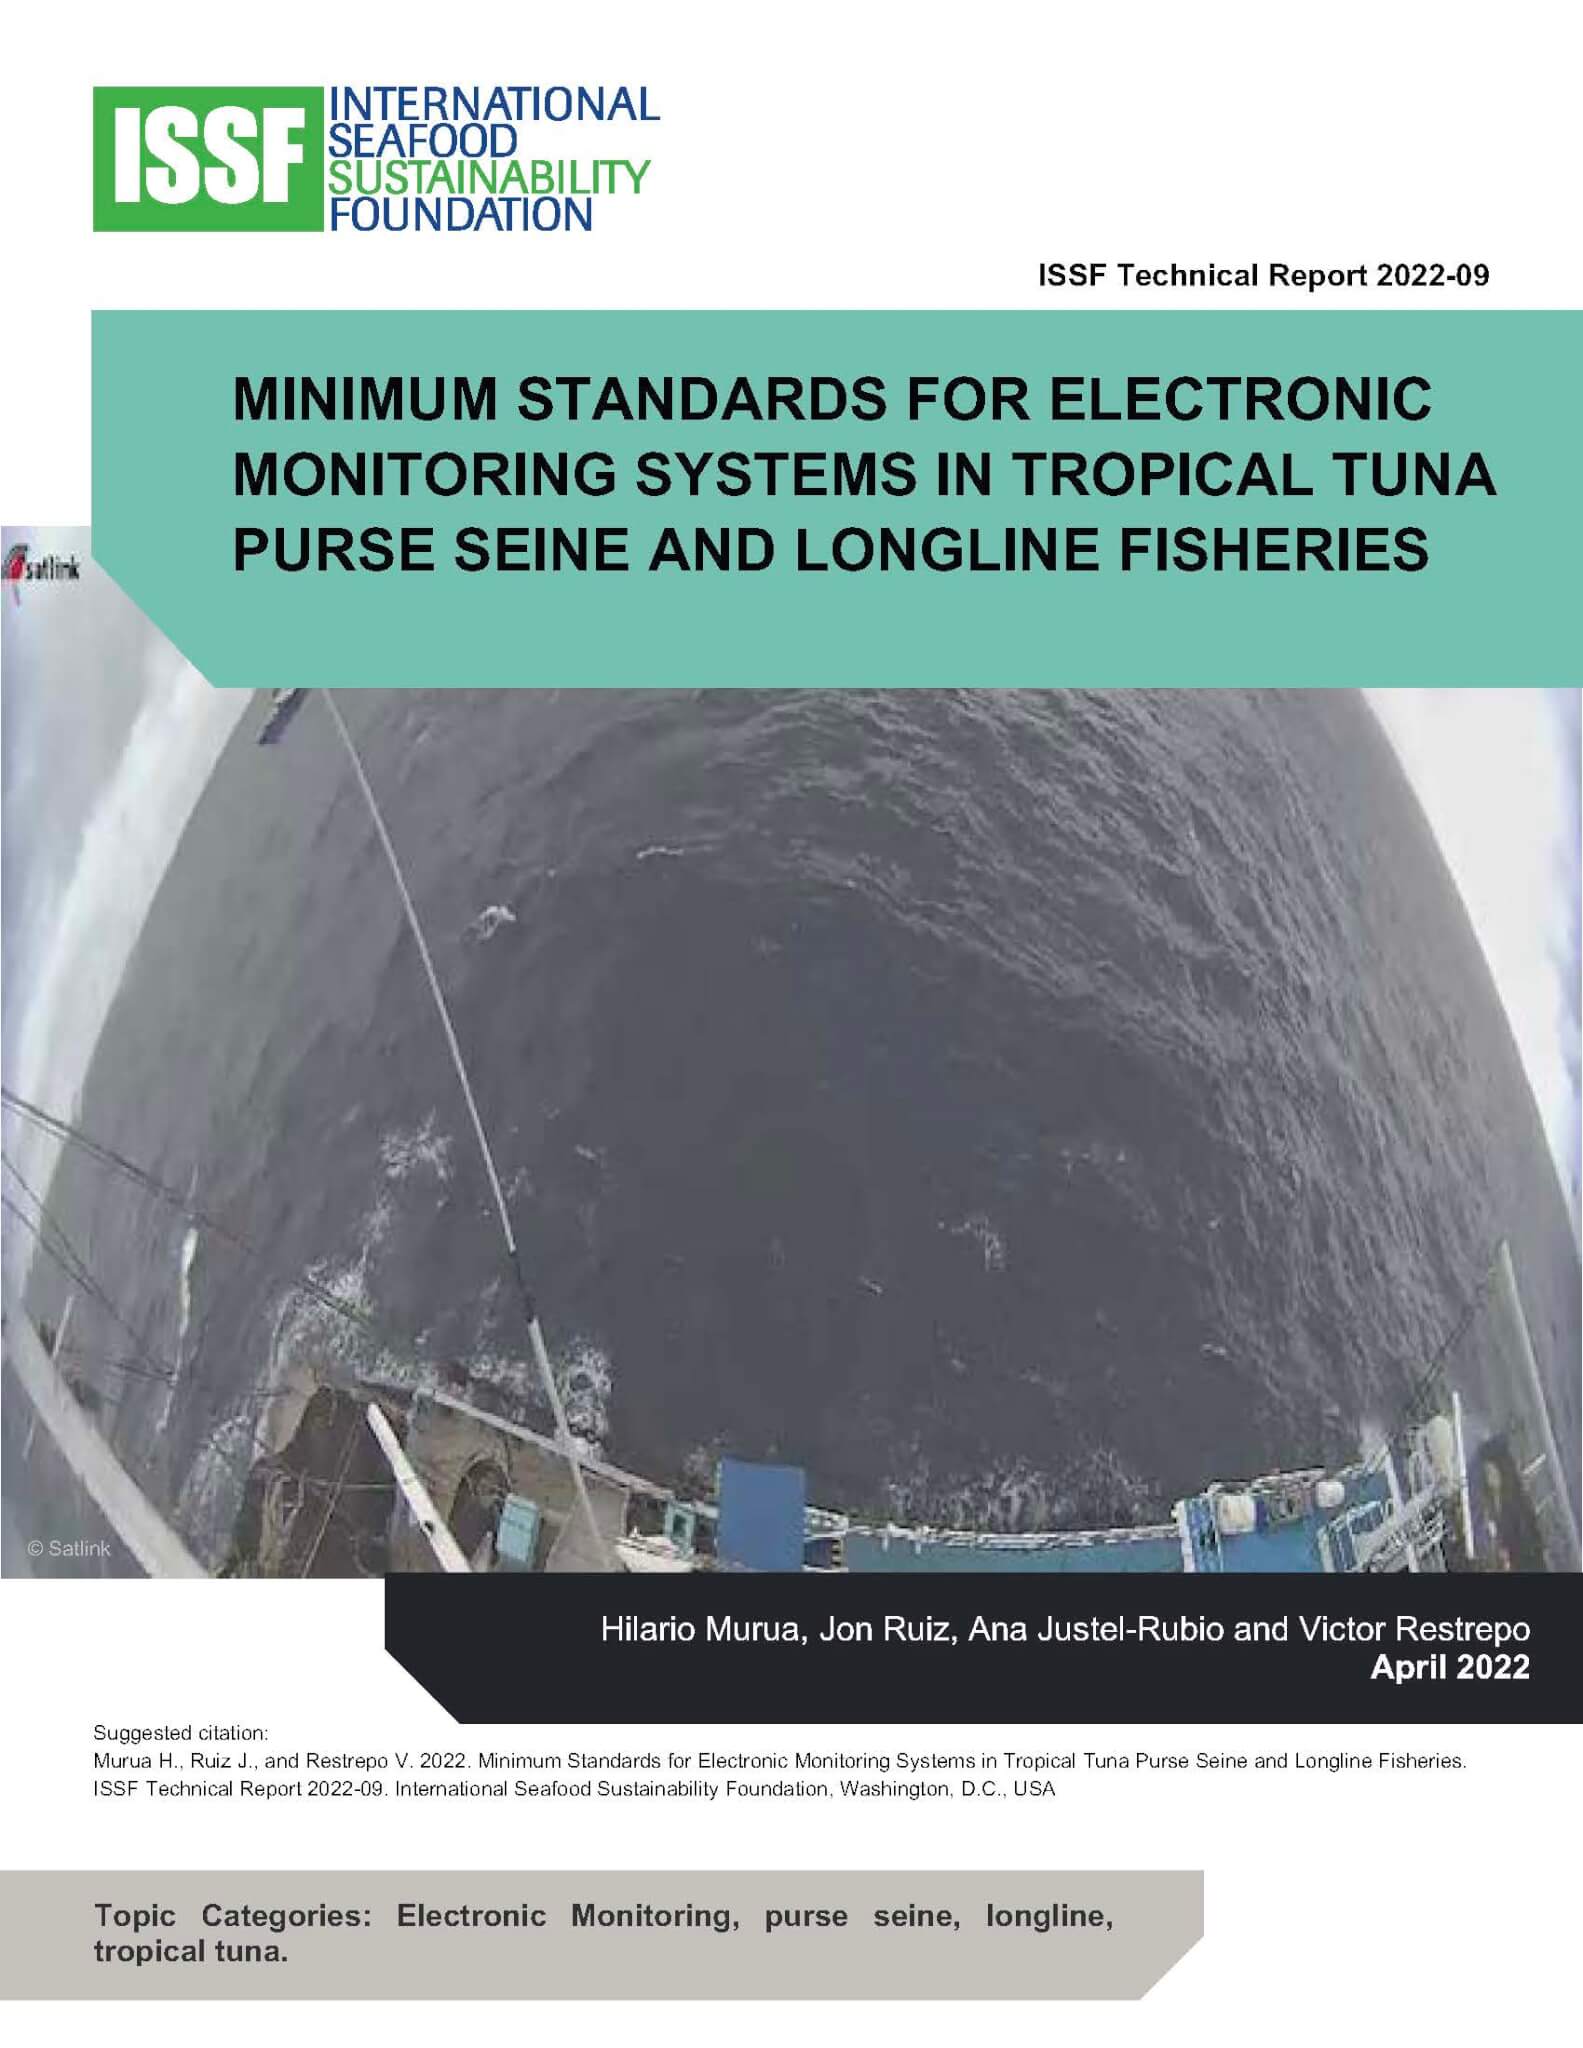 FISH AGGREGATING DEVICES (FADs) IN RESPONSIBLE TUNA FISHERIES